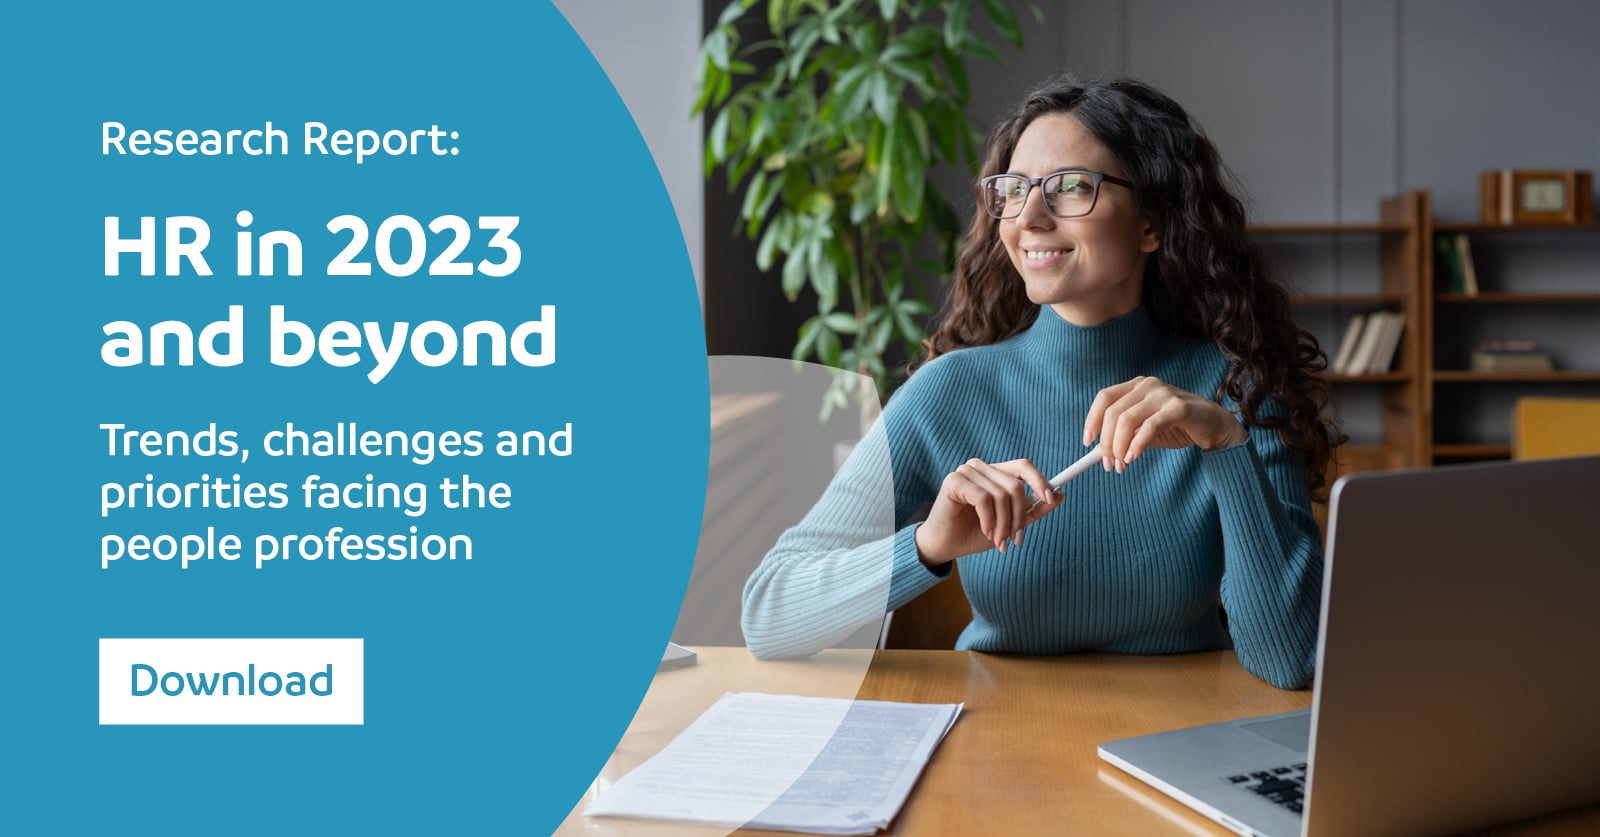 HR in 2023 and beyond report